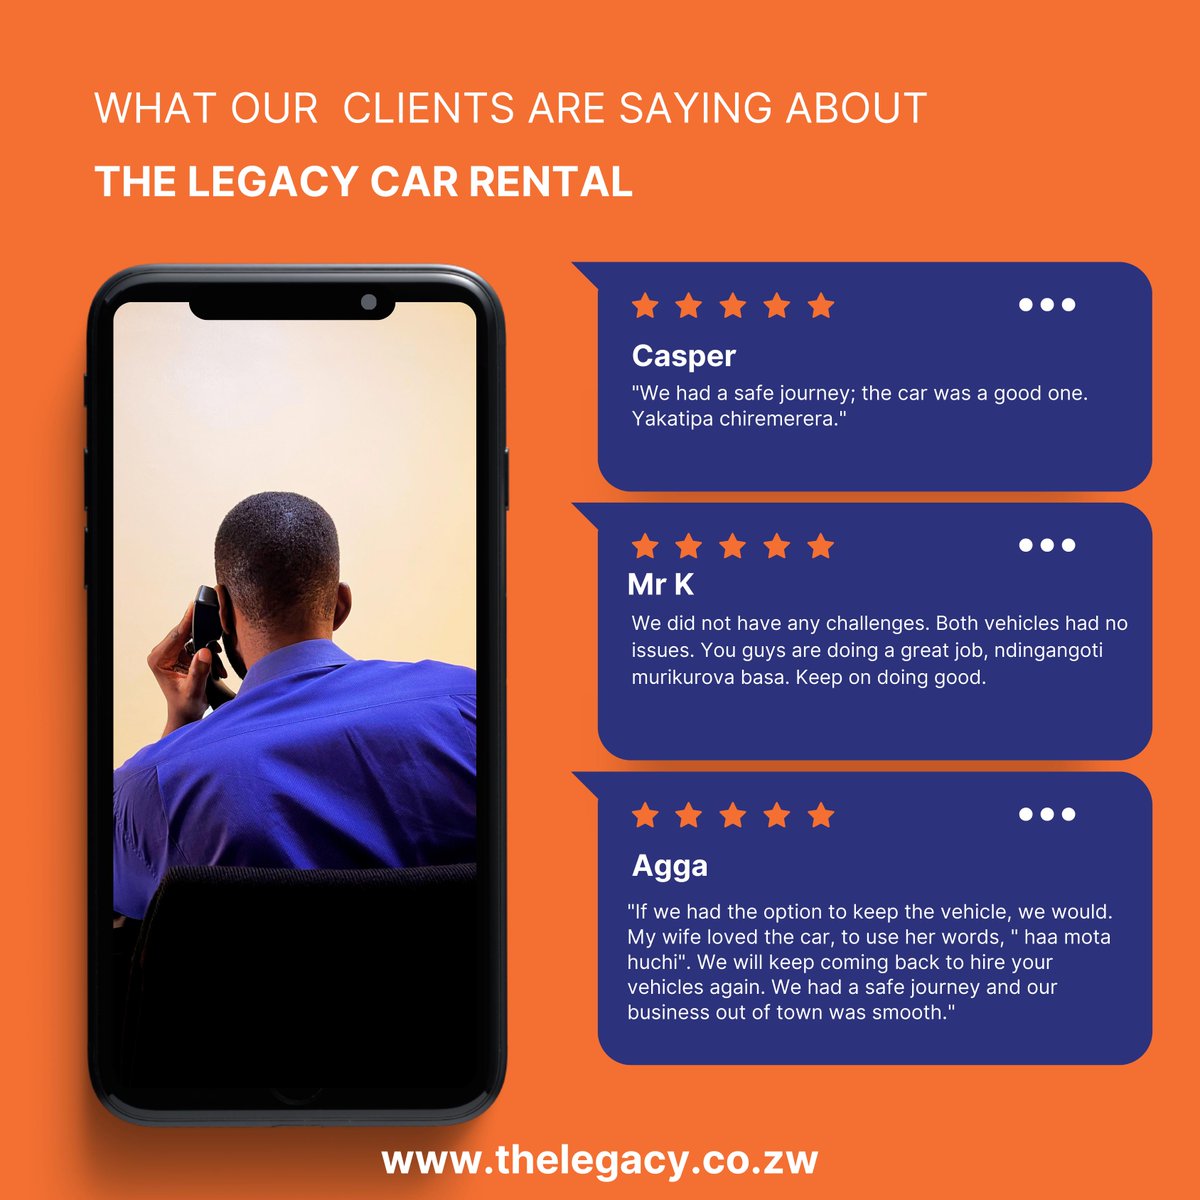 We are truly grateful for the wonderful feedback from our clients. Your trust and support mean the world to us! Let's continue this journey together. #customerfeedback #gratitude #clientlove #TheLegacy #carrental #loyalty